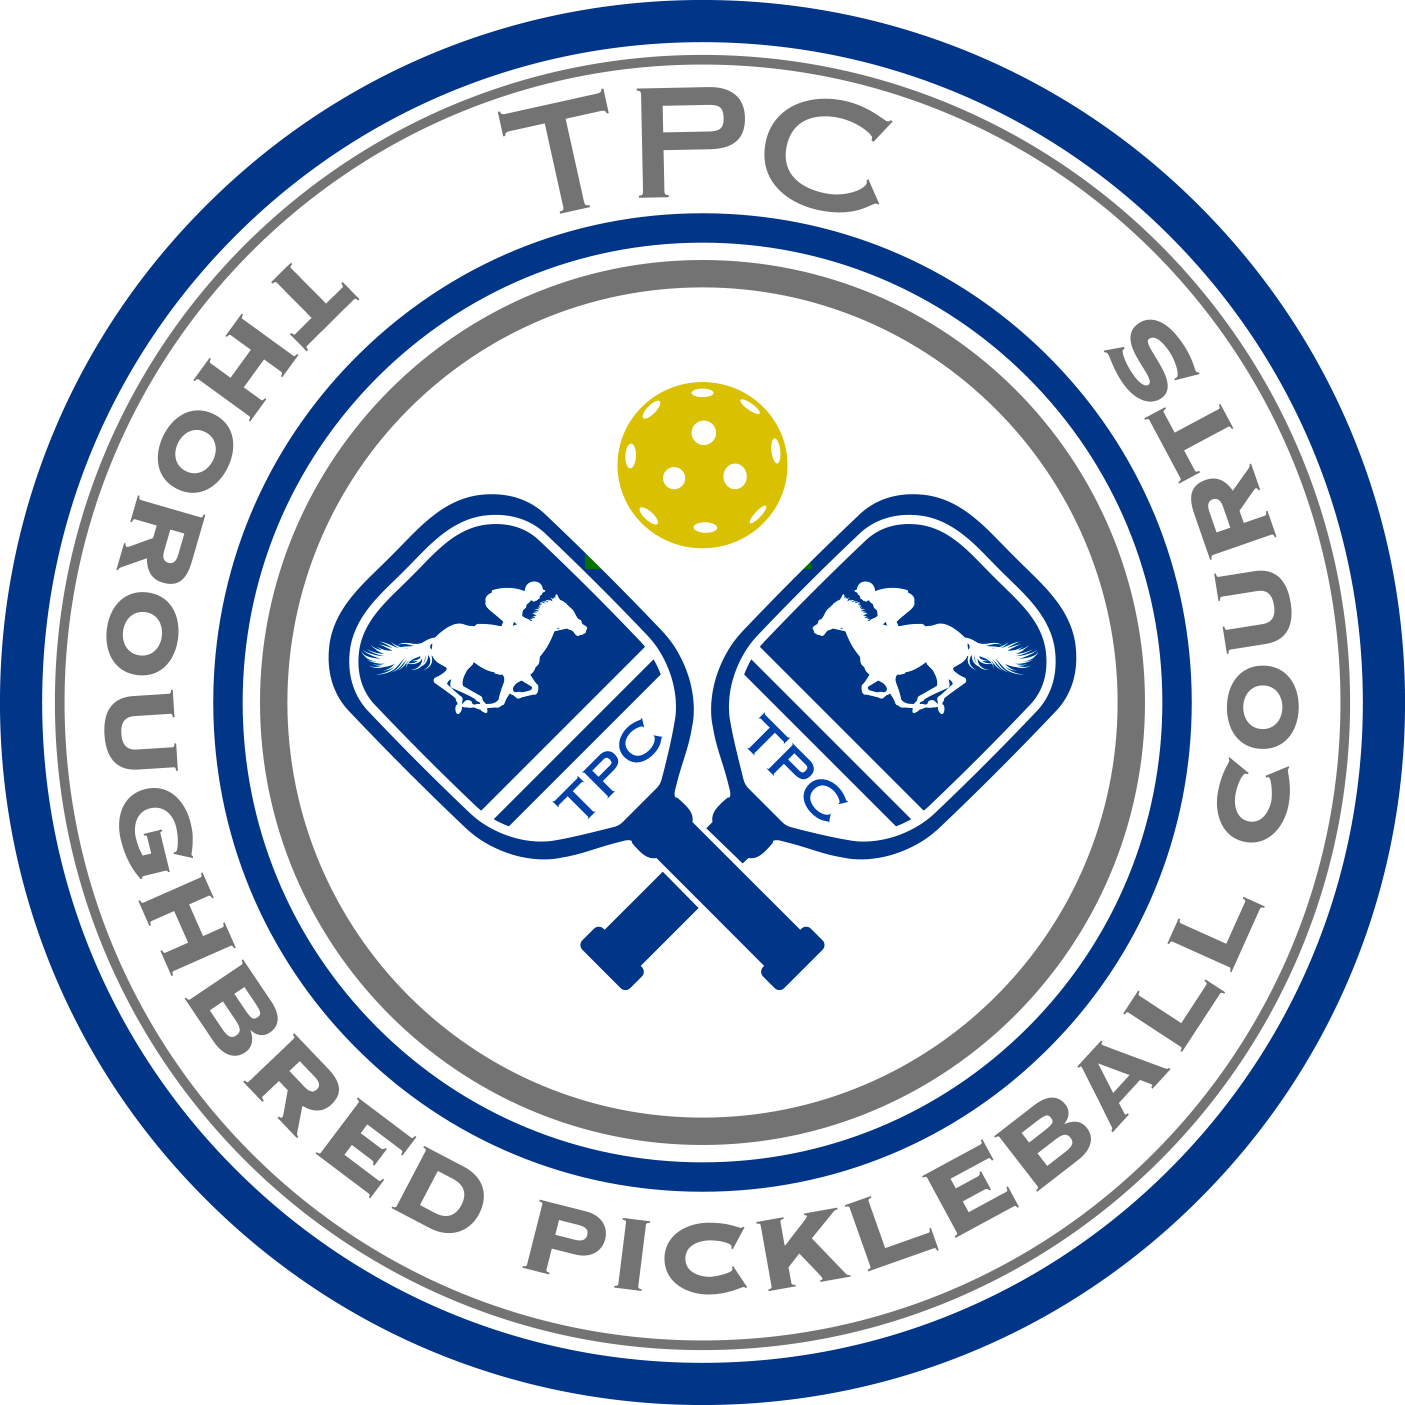 Thoroughbred Pickleball Courts